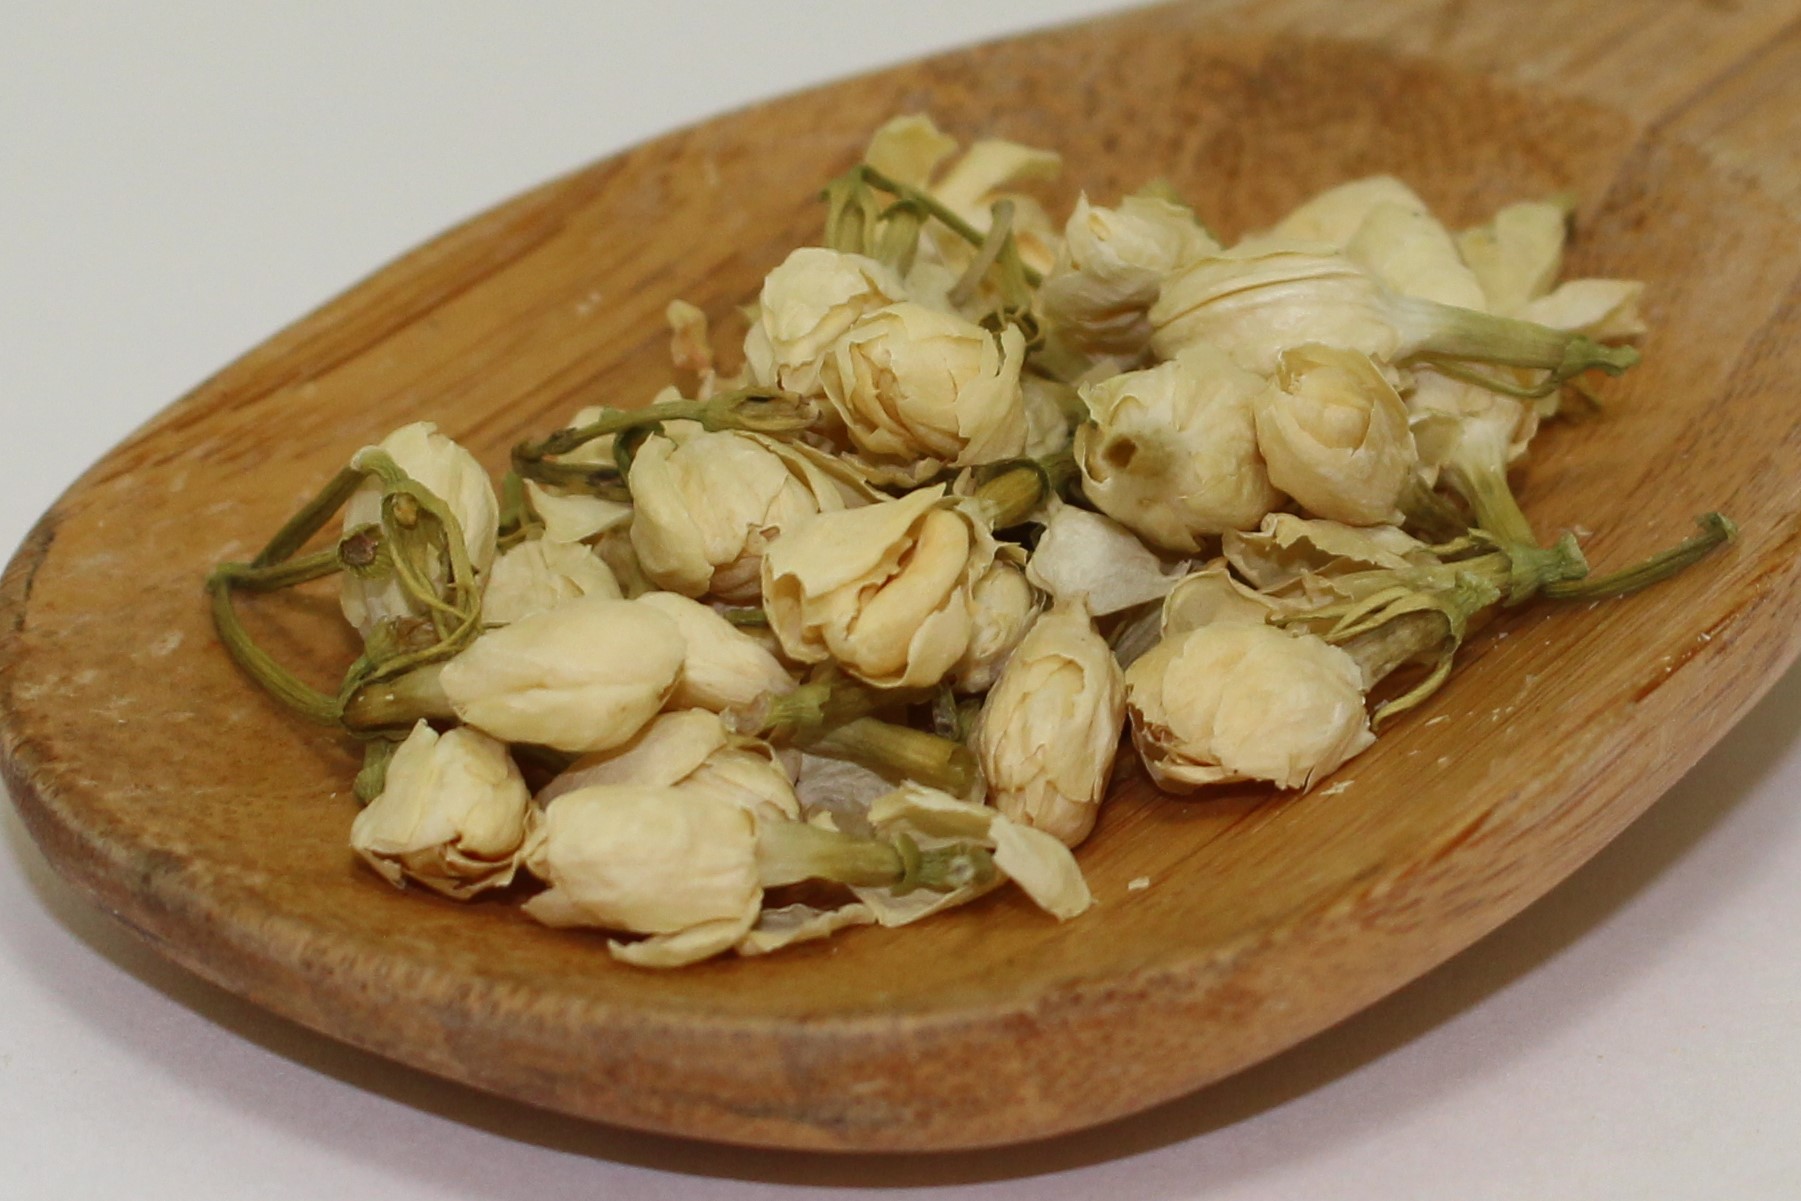 NY SPICE SHOP Jasmine Dried Flowers - Fresh Edible Flower For Drinks -  Lotus Root Flowering Tea (8 Ounces)